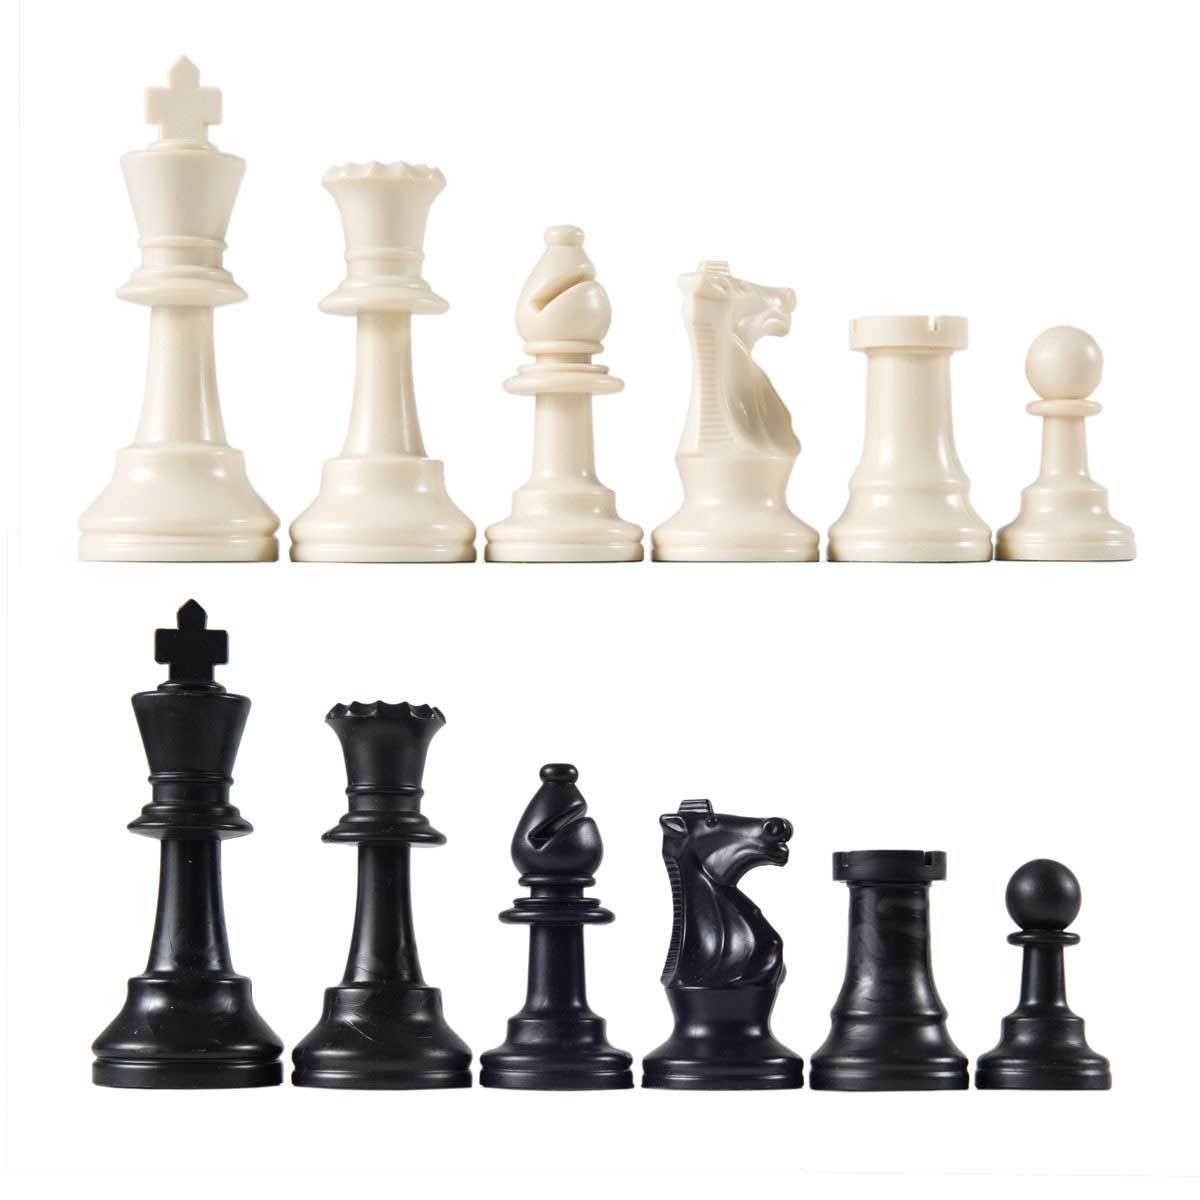 Wholesale Chess Basic Club Sets (5-Pack)